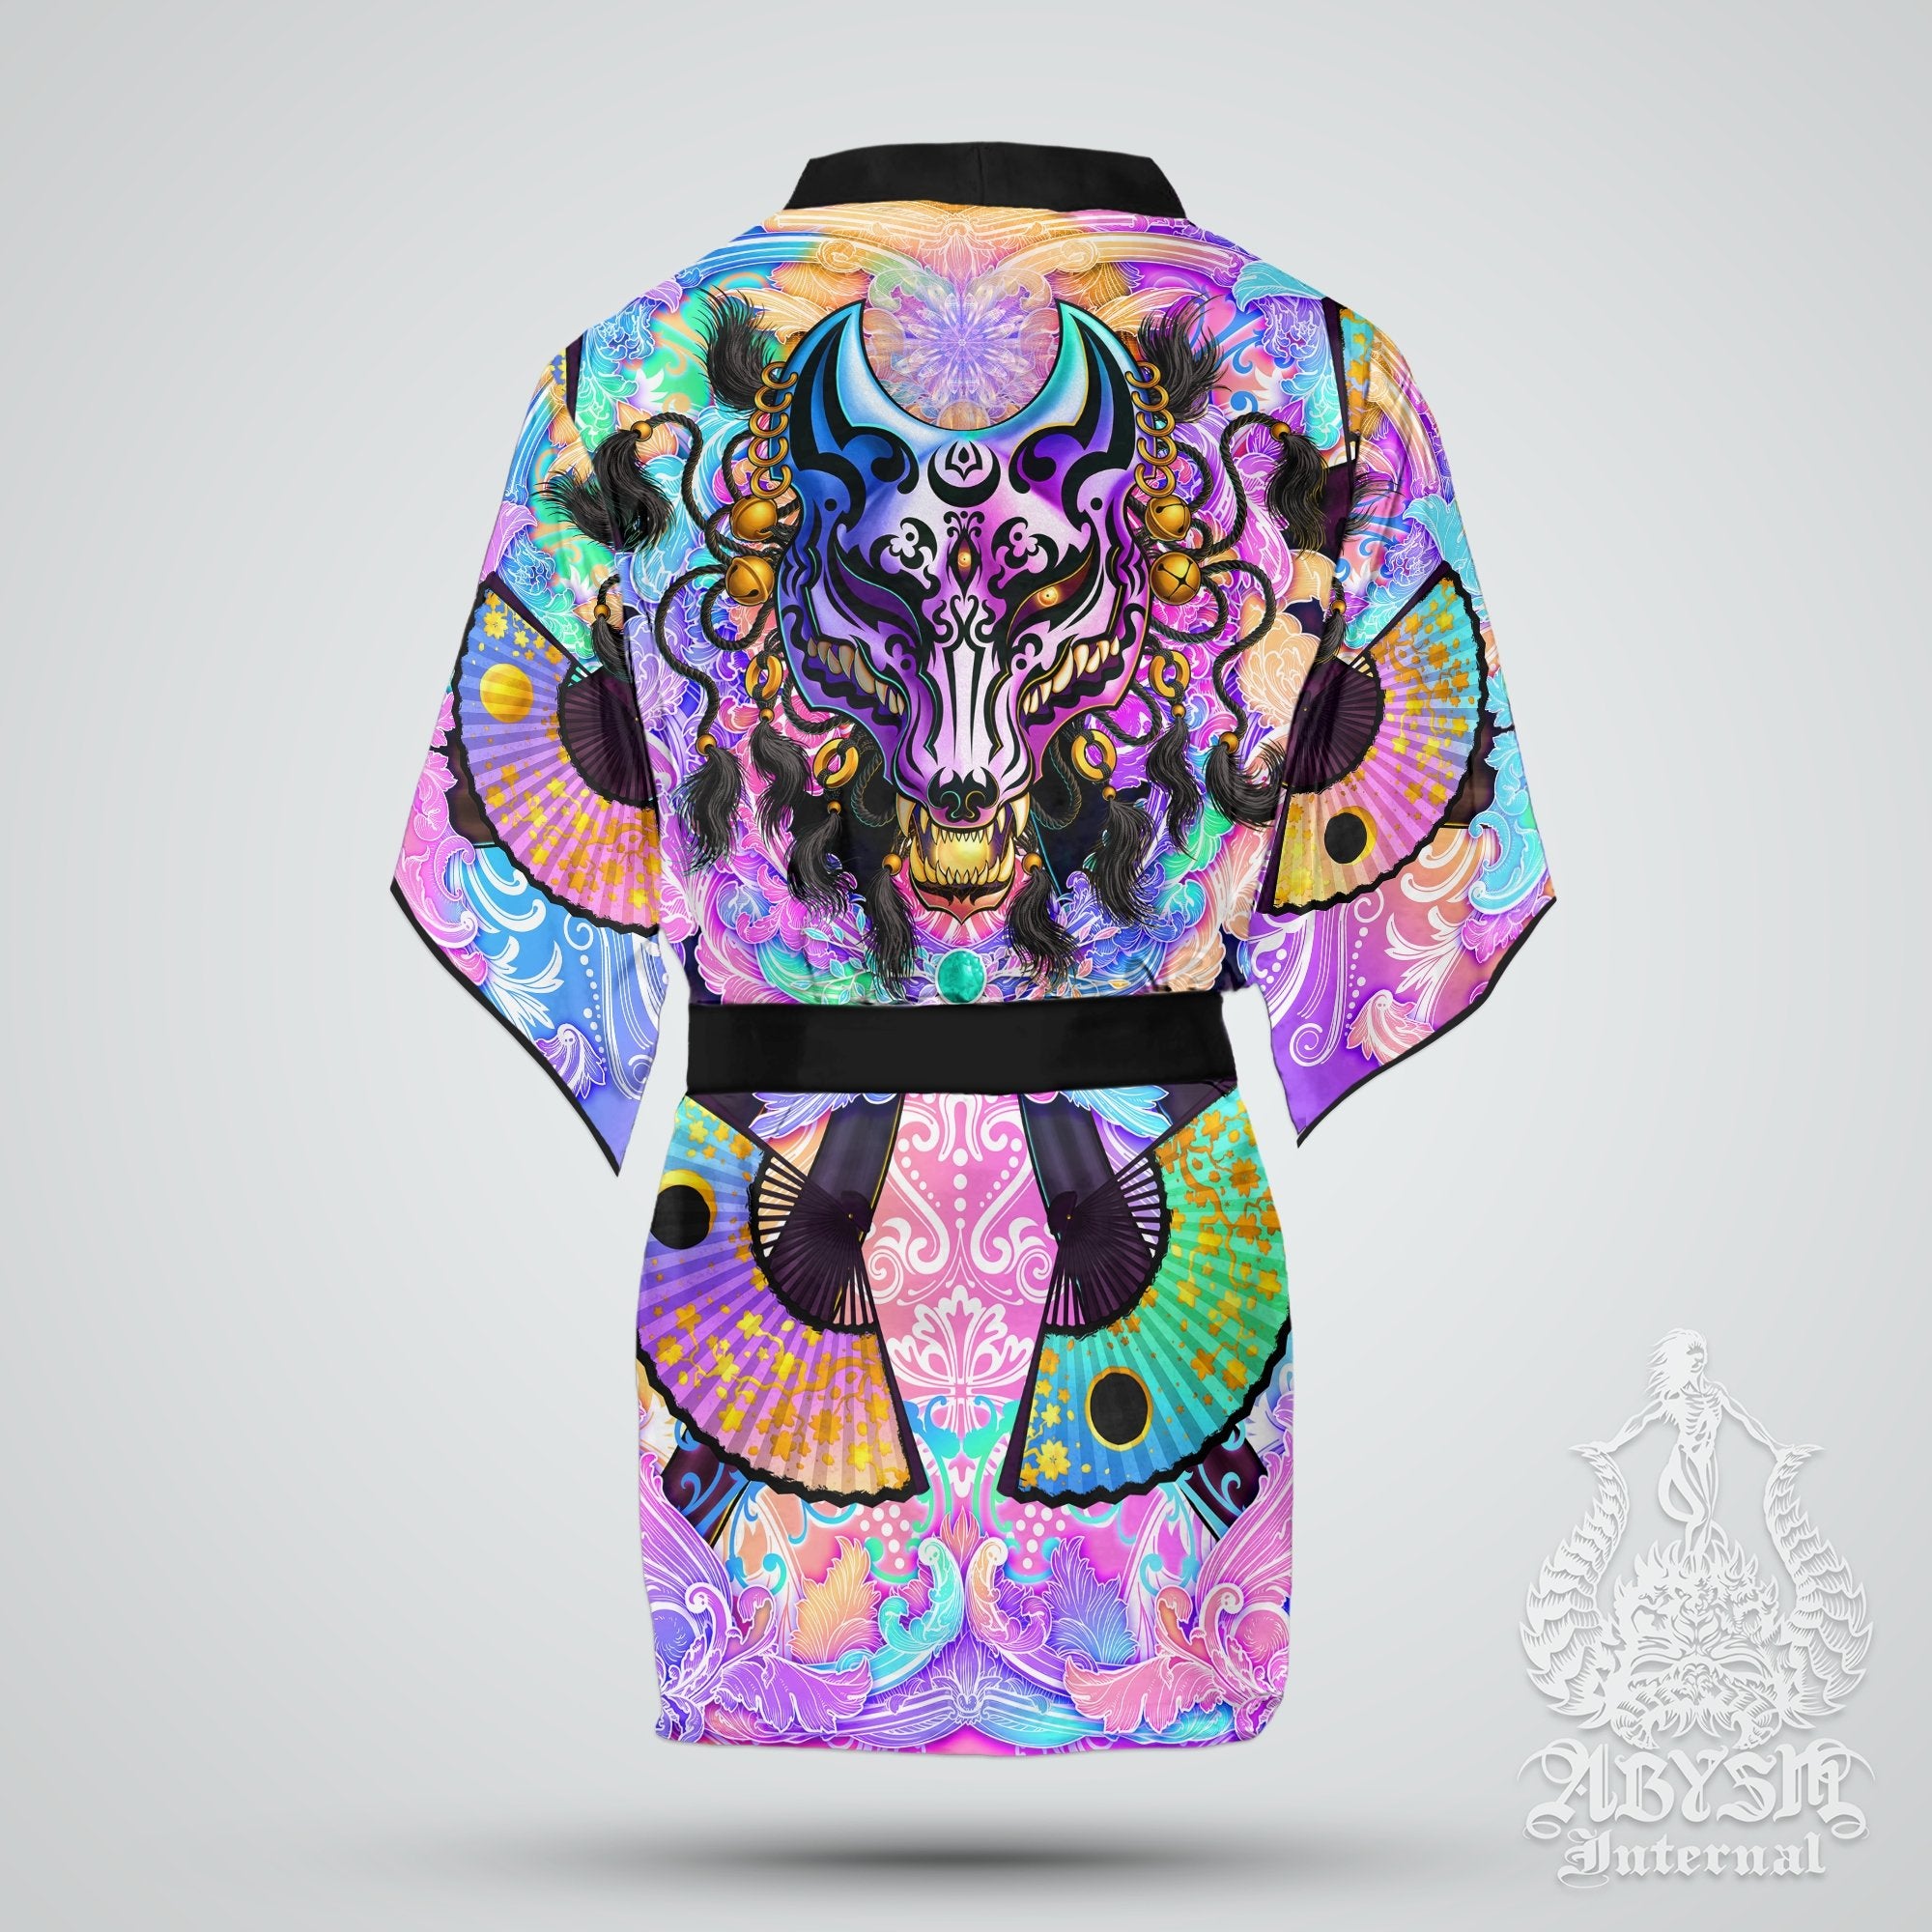 Kitsune Cover Up, Beach Rave Outfit, Japanese Party Kimono, Summer Festival Robe, Indie and Alternative Clothing, Unisex - Fox Mask, Holographic Pastel Punk Black - Abysm Internal